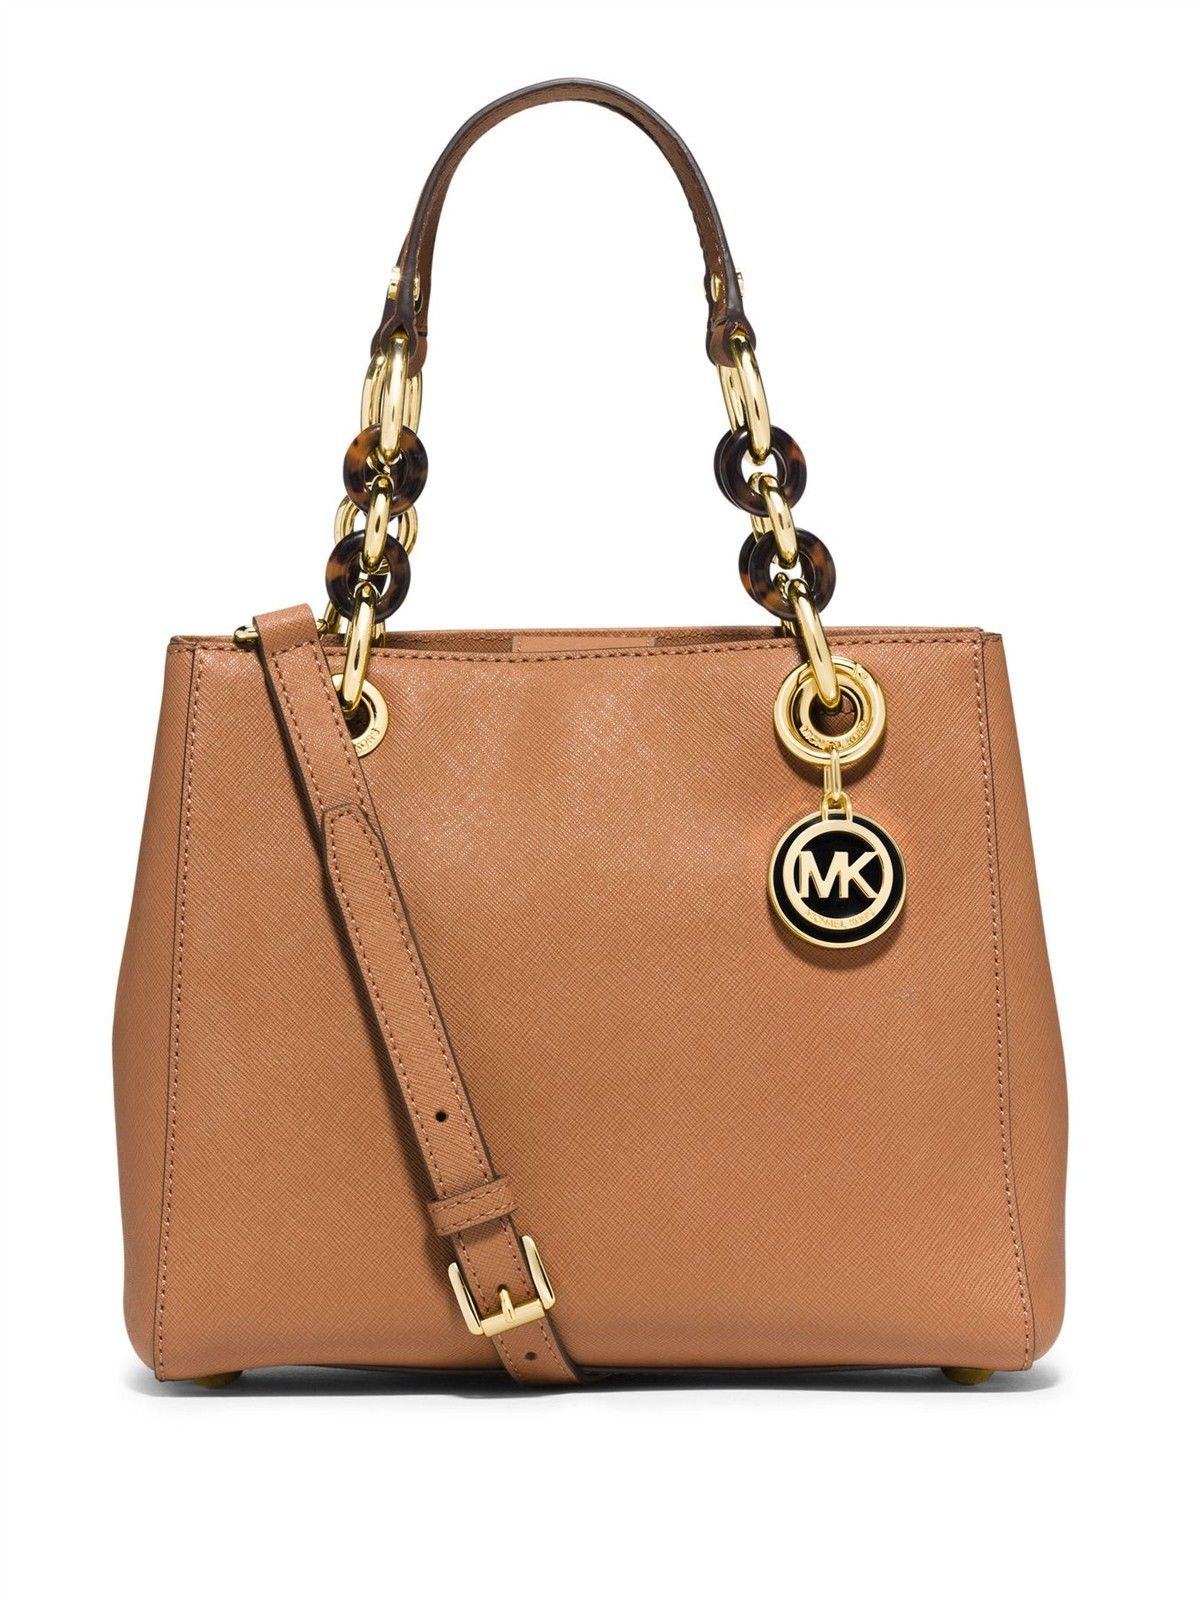 Michael Kors Cynthia MD Satchel Pale Pink Gold Chain Bag Saffiano Leather  NWT